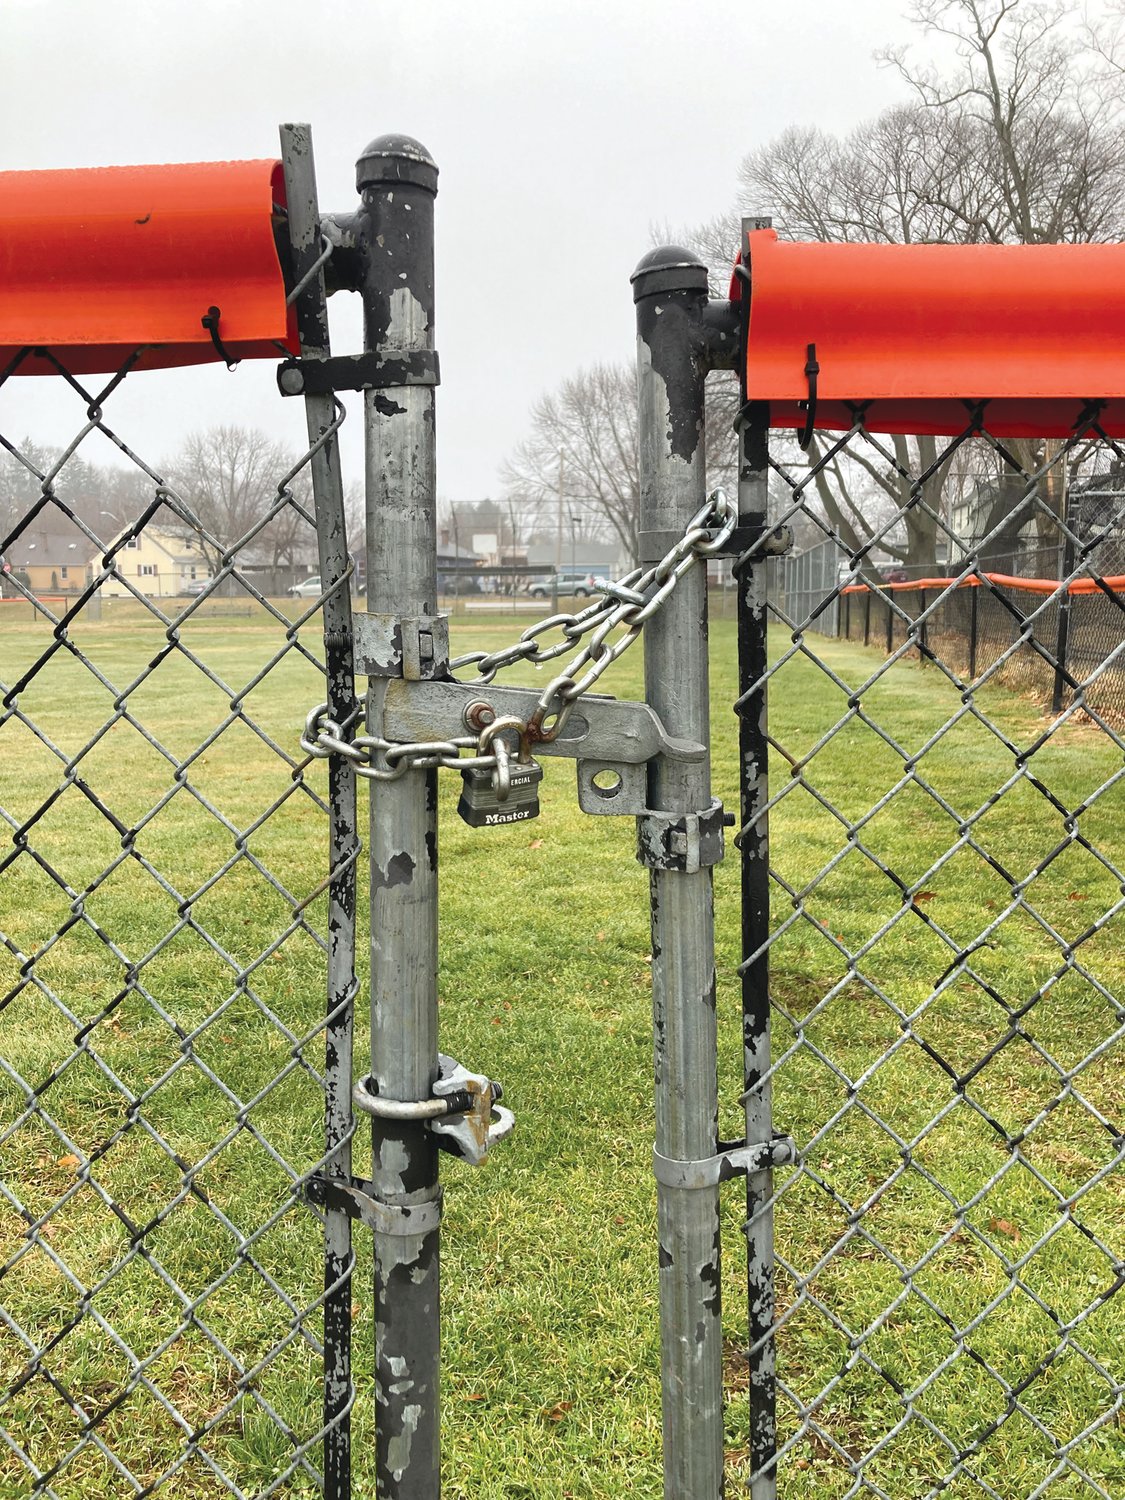 LOCKED OUT: Some of Cranston’s
little league fields remain locked
even after the baseball season.